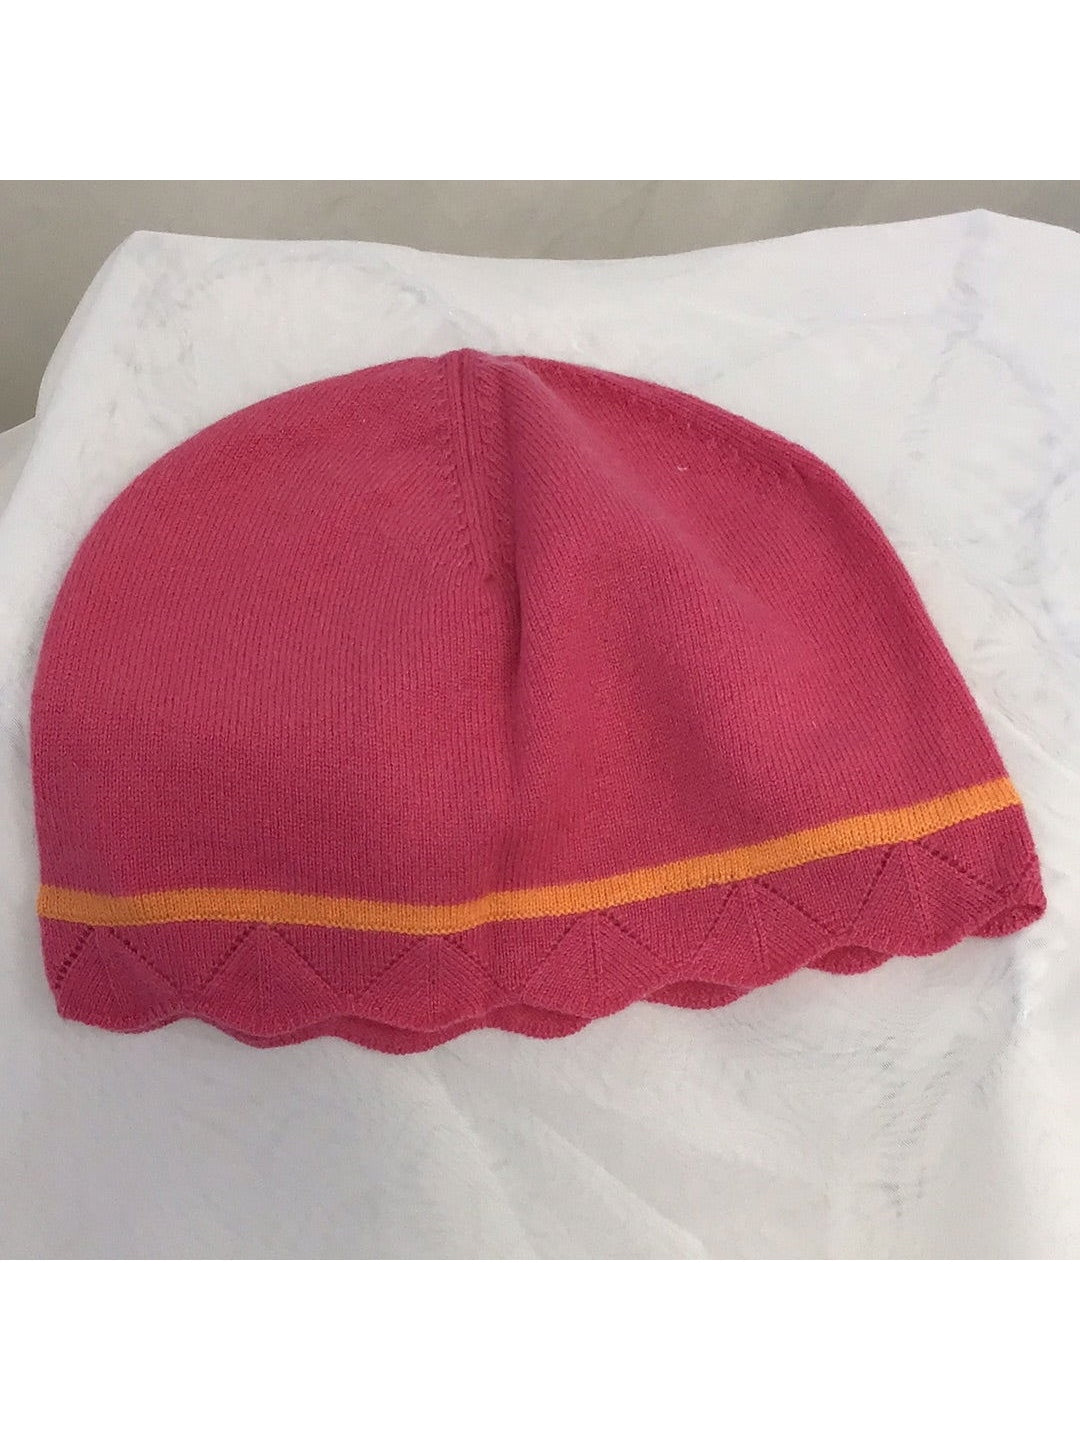 L.L. Bean Casual Pointelle Hat- Pink/Orange - The Kennedy Collective Thrift - 